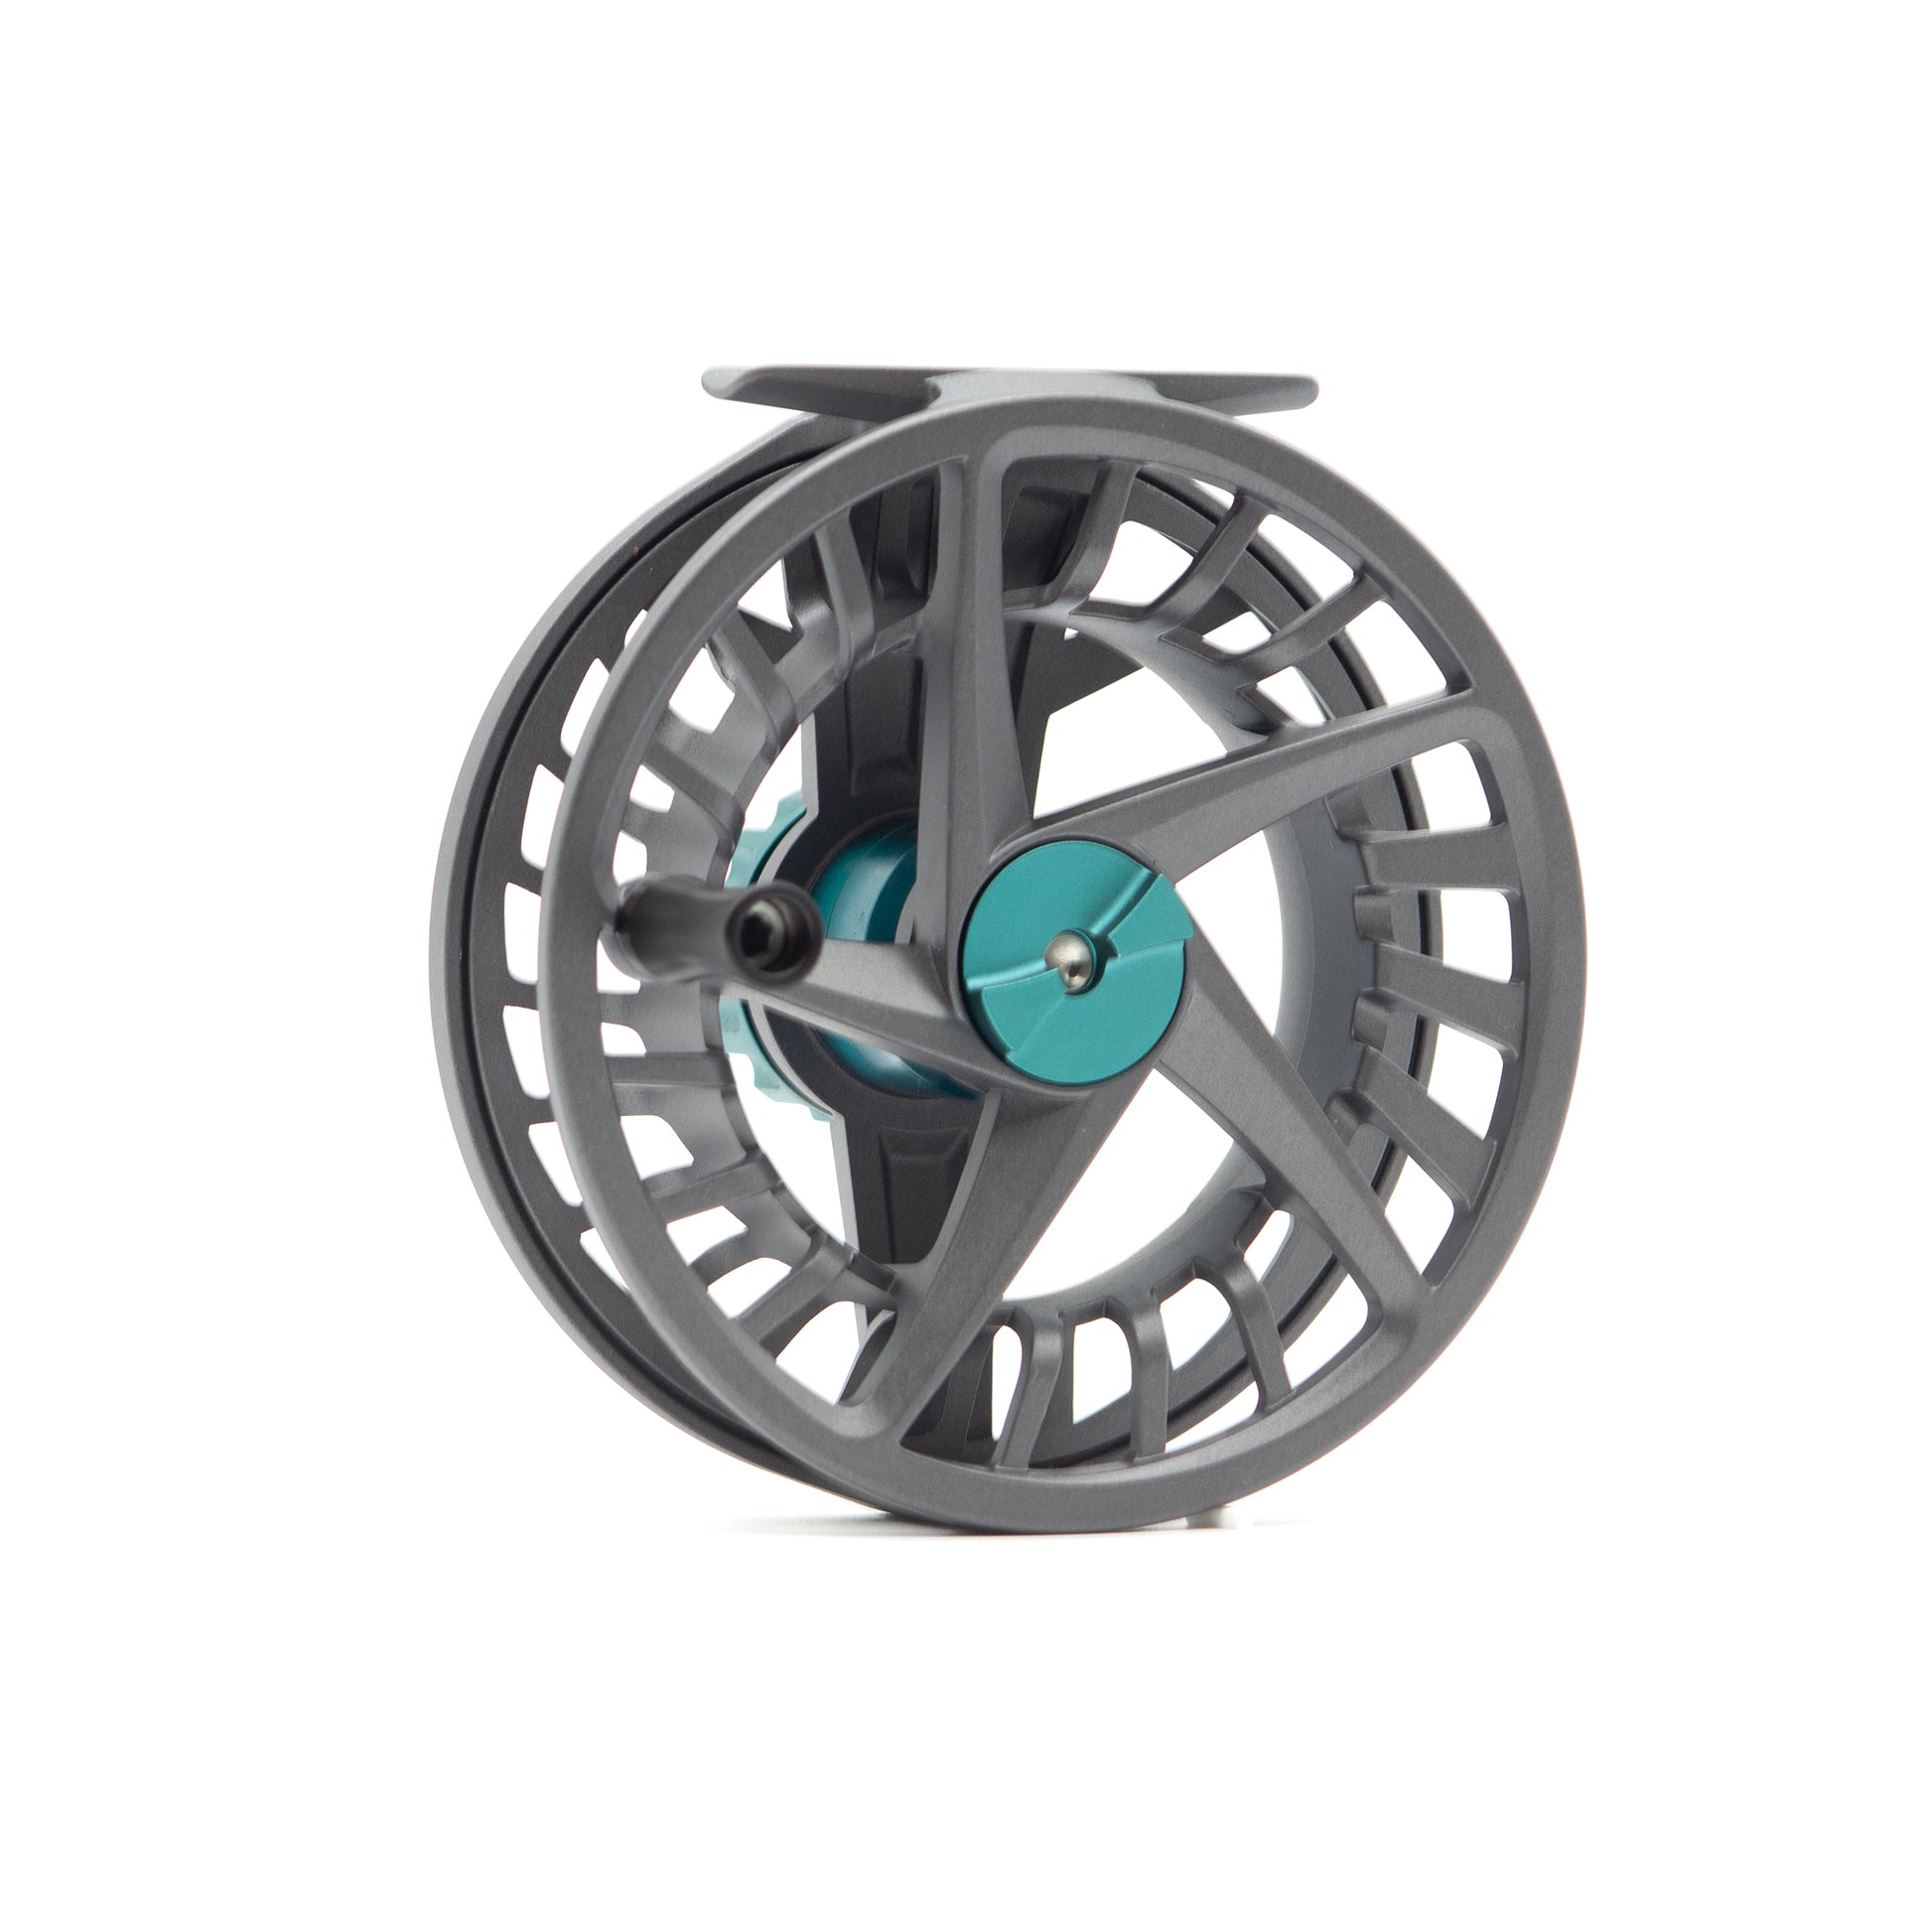 Lamson Liquid Max – Harry Goode's Outfitters